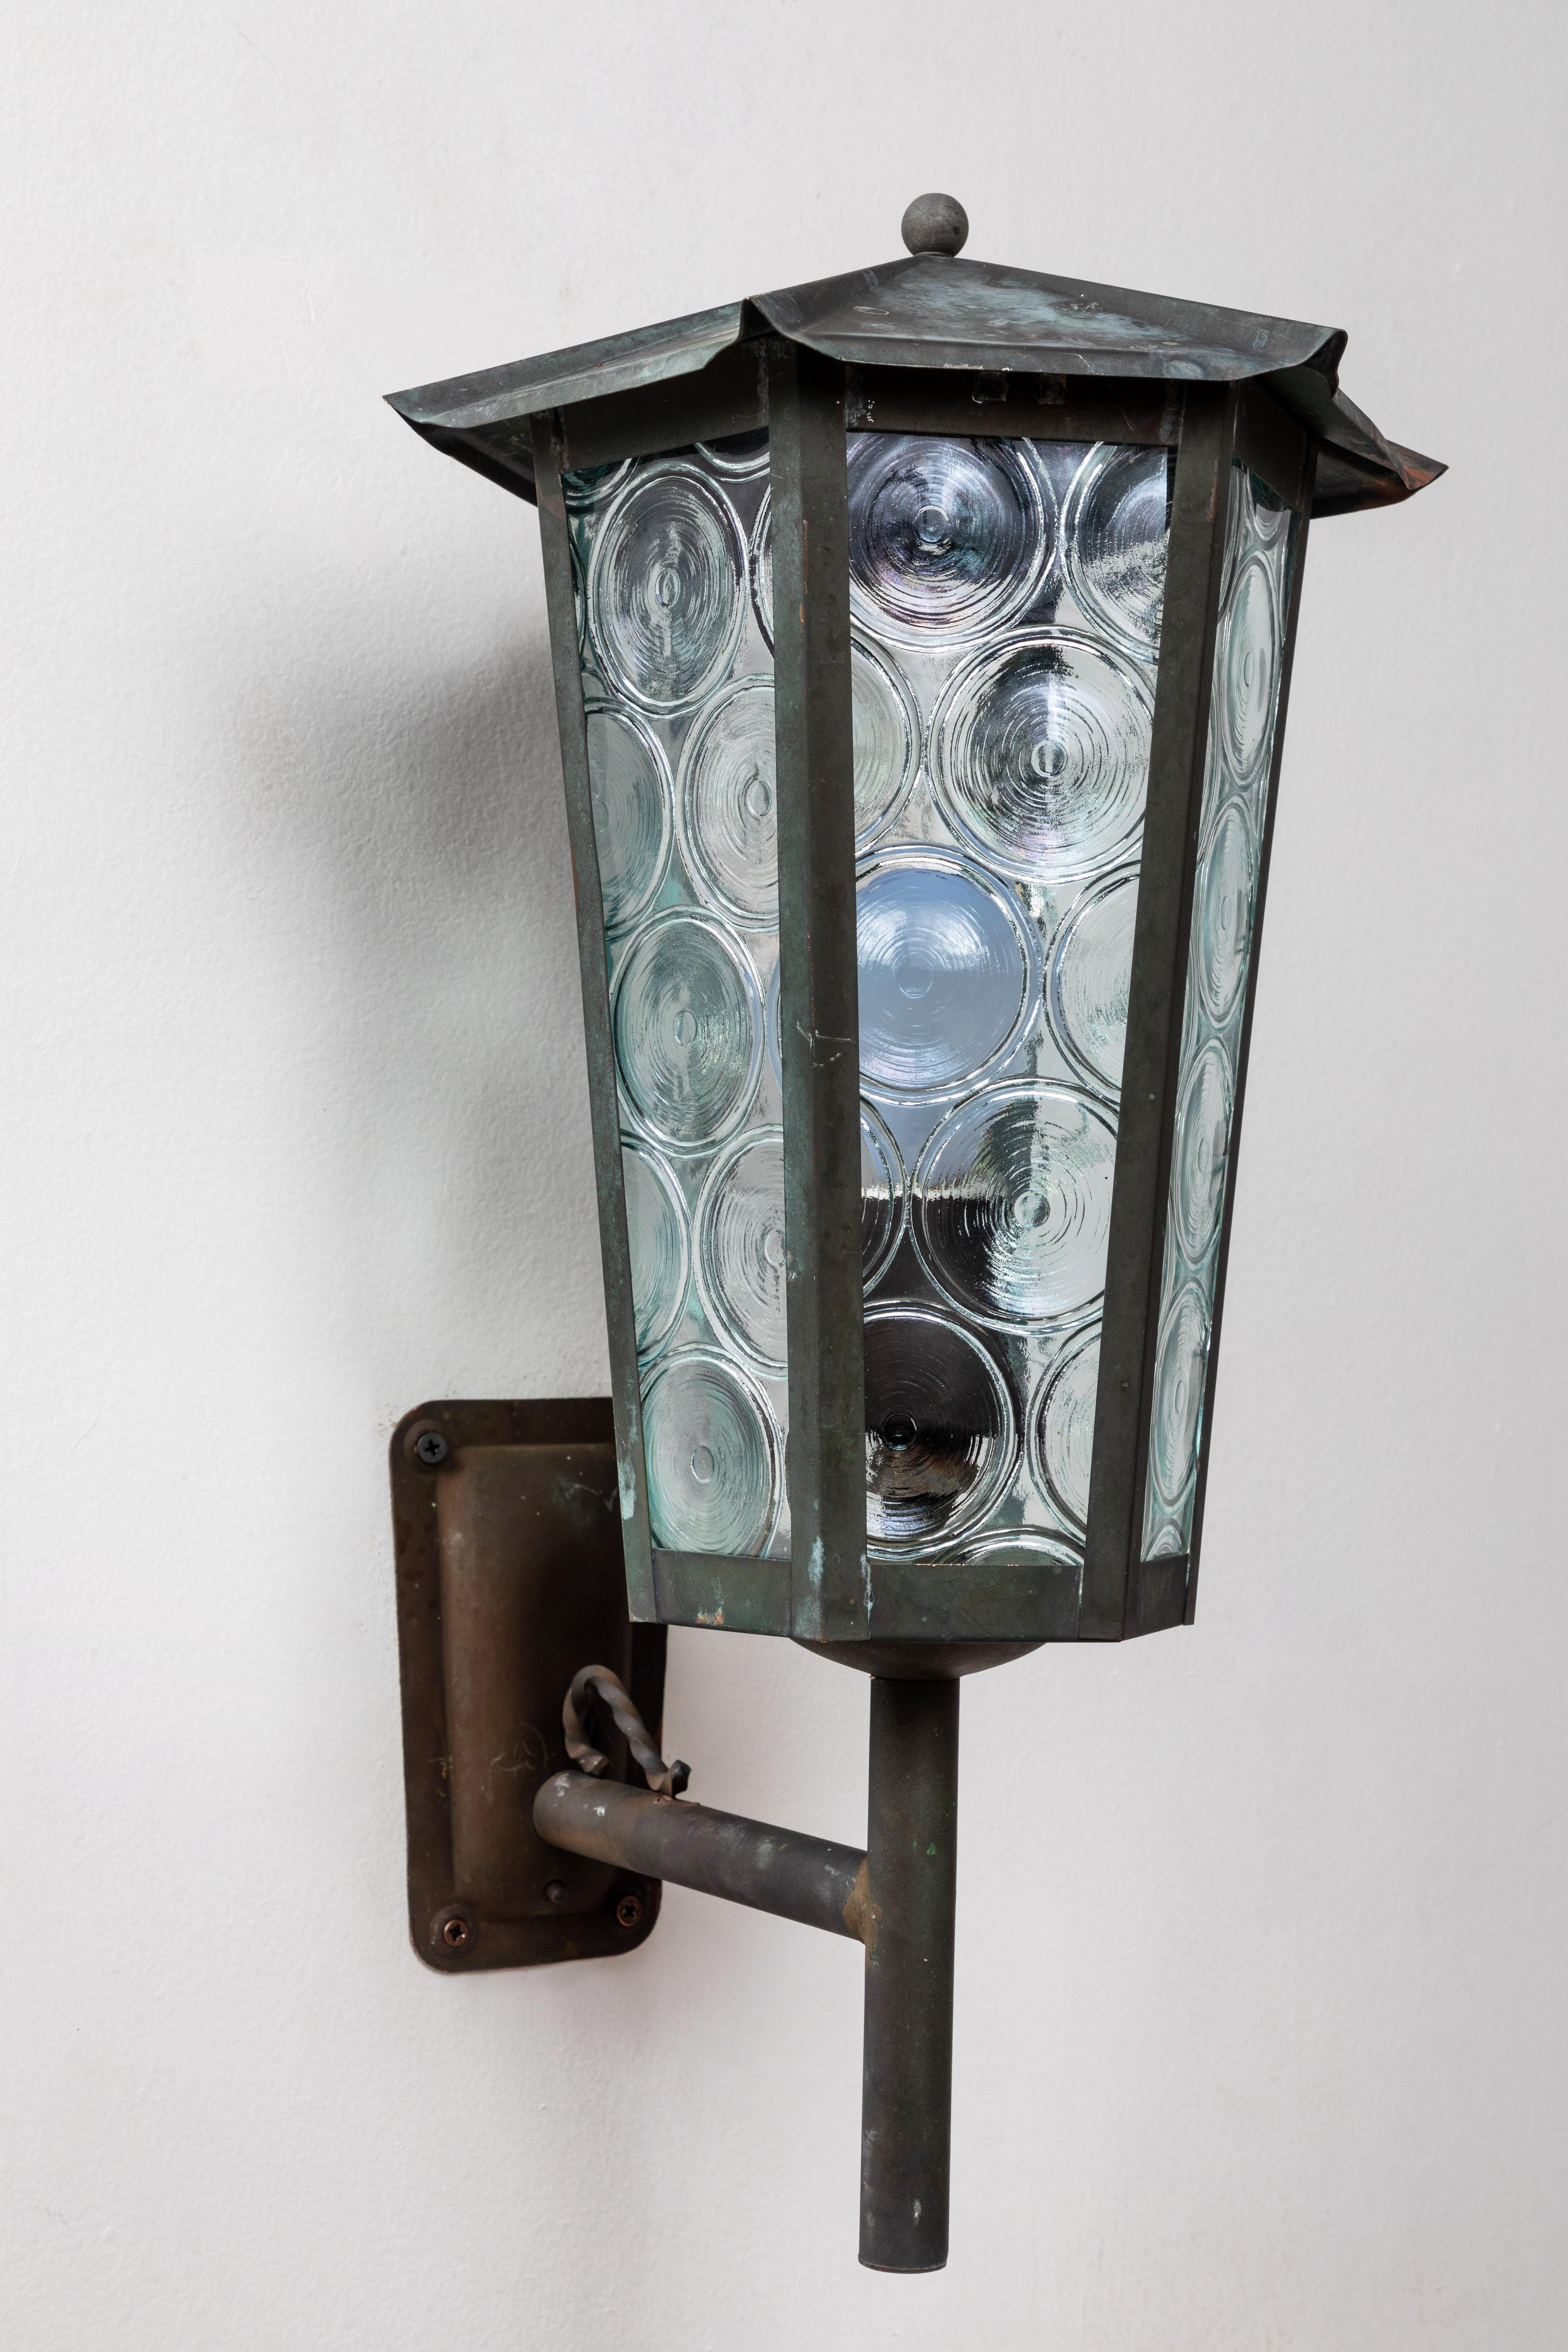 1950s Scandinavian outdoor wall lights in patinated copper and glass. Designer unknown. Executed in richly patinated copper and opaque green bottle glass. A highly sculptural design, these outdoor or indoor wall lights exude Scandinavian refinement